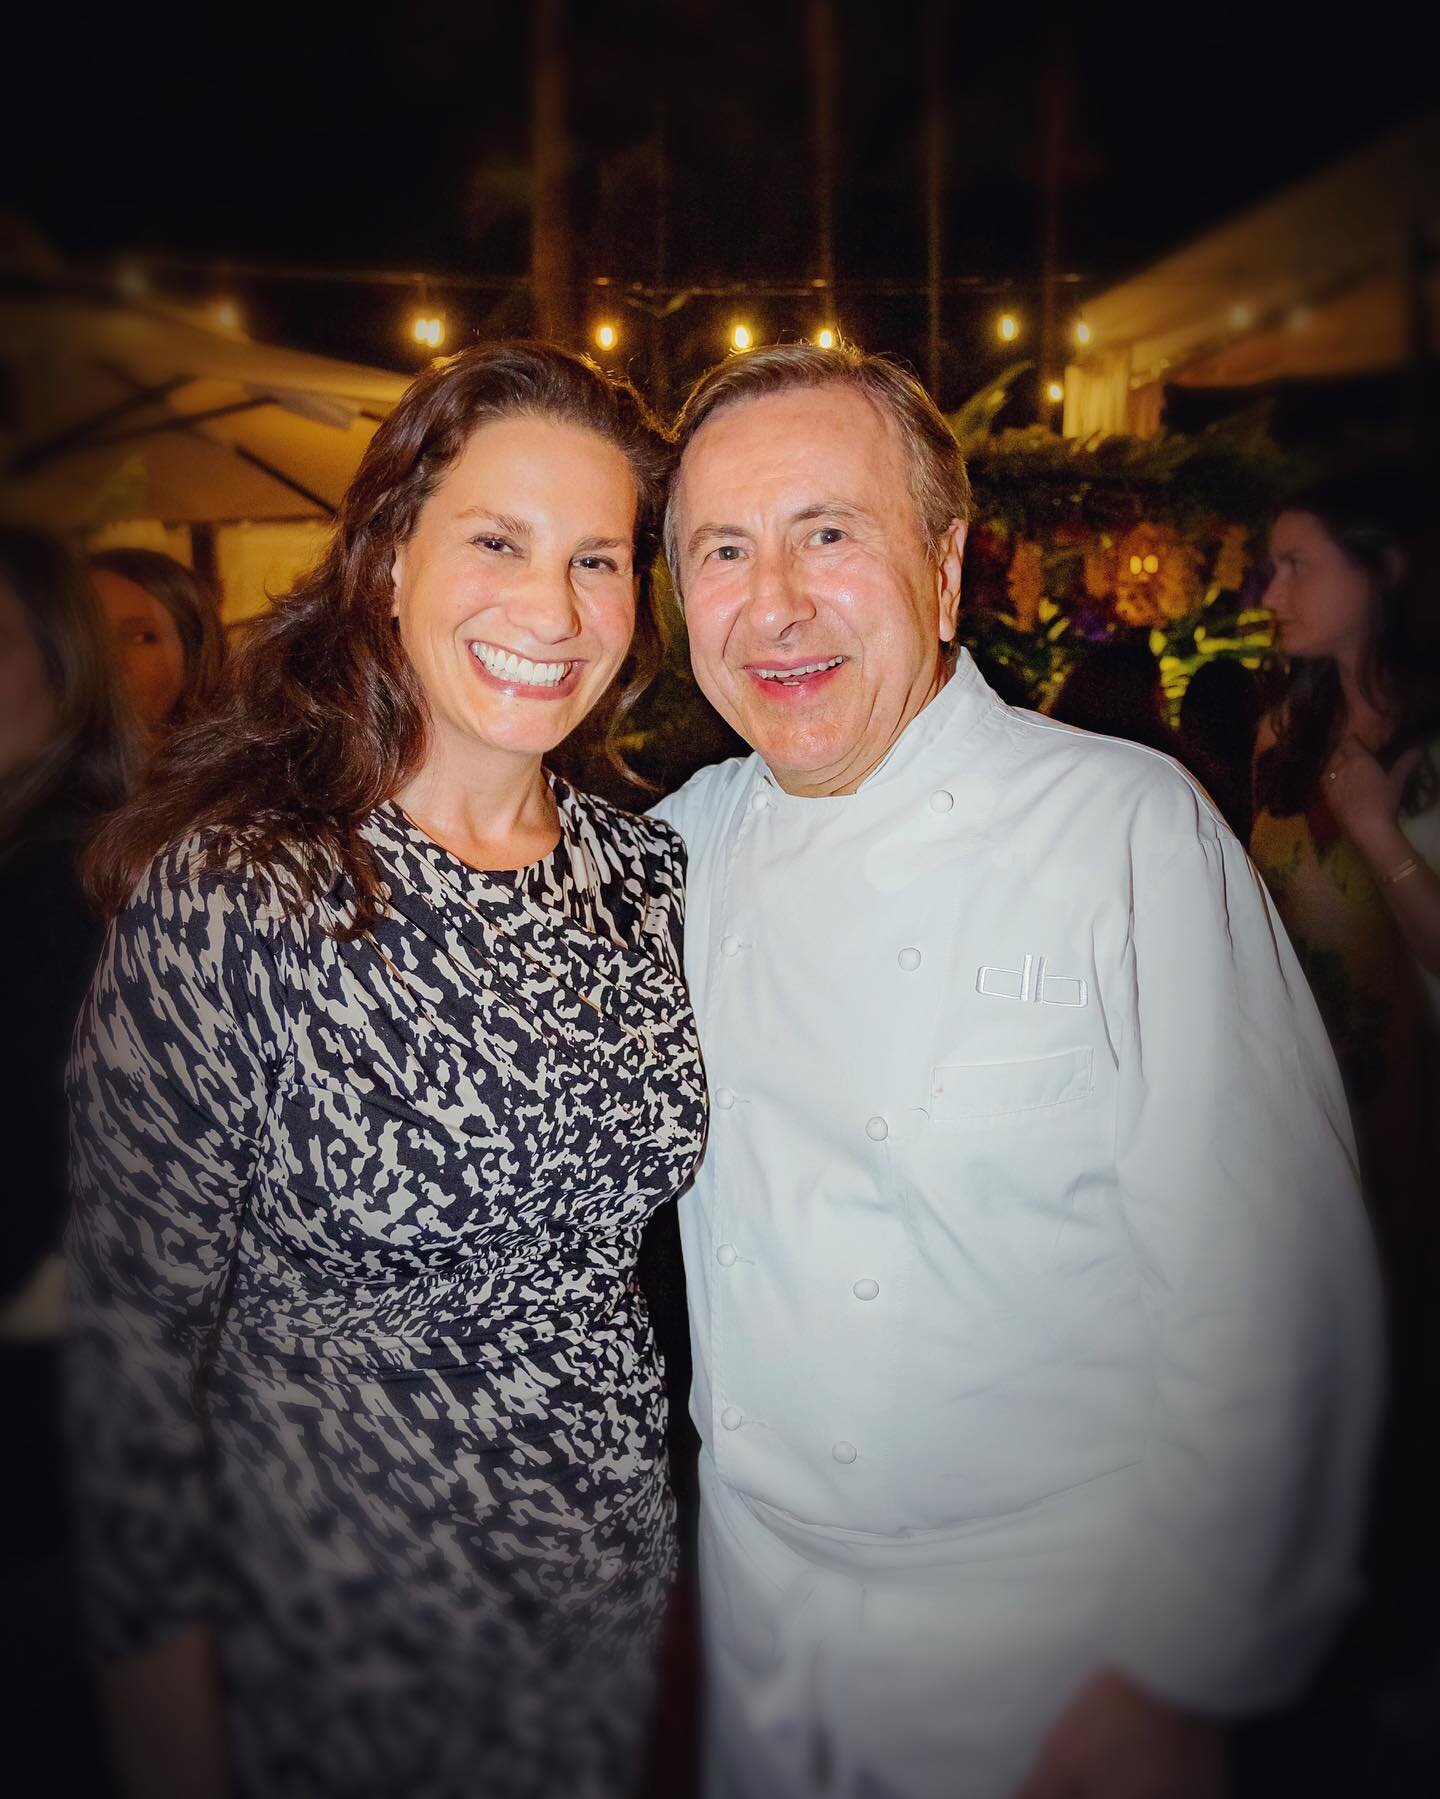 𝐉𝐨𝐲𝐞𝐮𝐱 𝐀𝐧𝐧𝐢𝐯𝐞𝐫𝐬𝐚𝐢𝐫𝐞 𝐃𝐁!! @danielboulud My favorite former boss of all time!! 🎉 Thank you for being an incredible mentor and inspiration. Beyond grateful for You! and wishing you an incredible year ahead 🎂🥂🇫🇷⁣
⁣
#joyeuxanniver